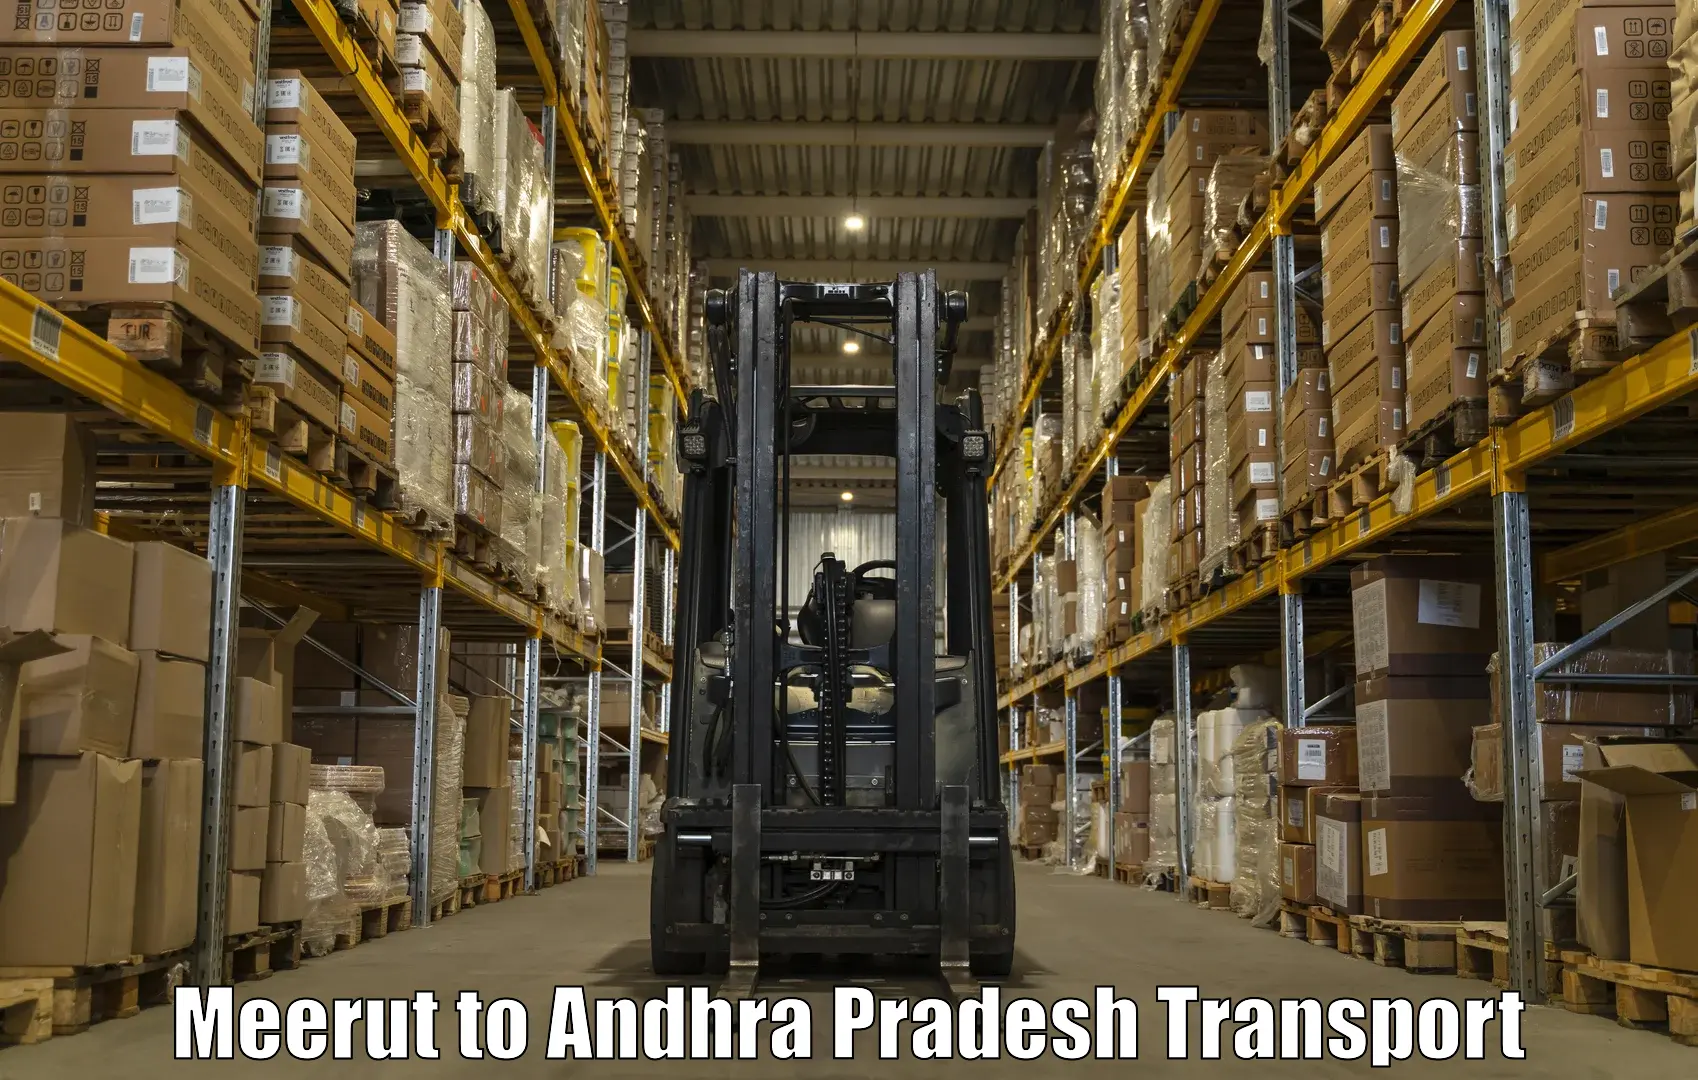 Daily parcel service transport Meerut to Hindupur